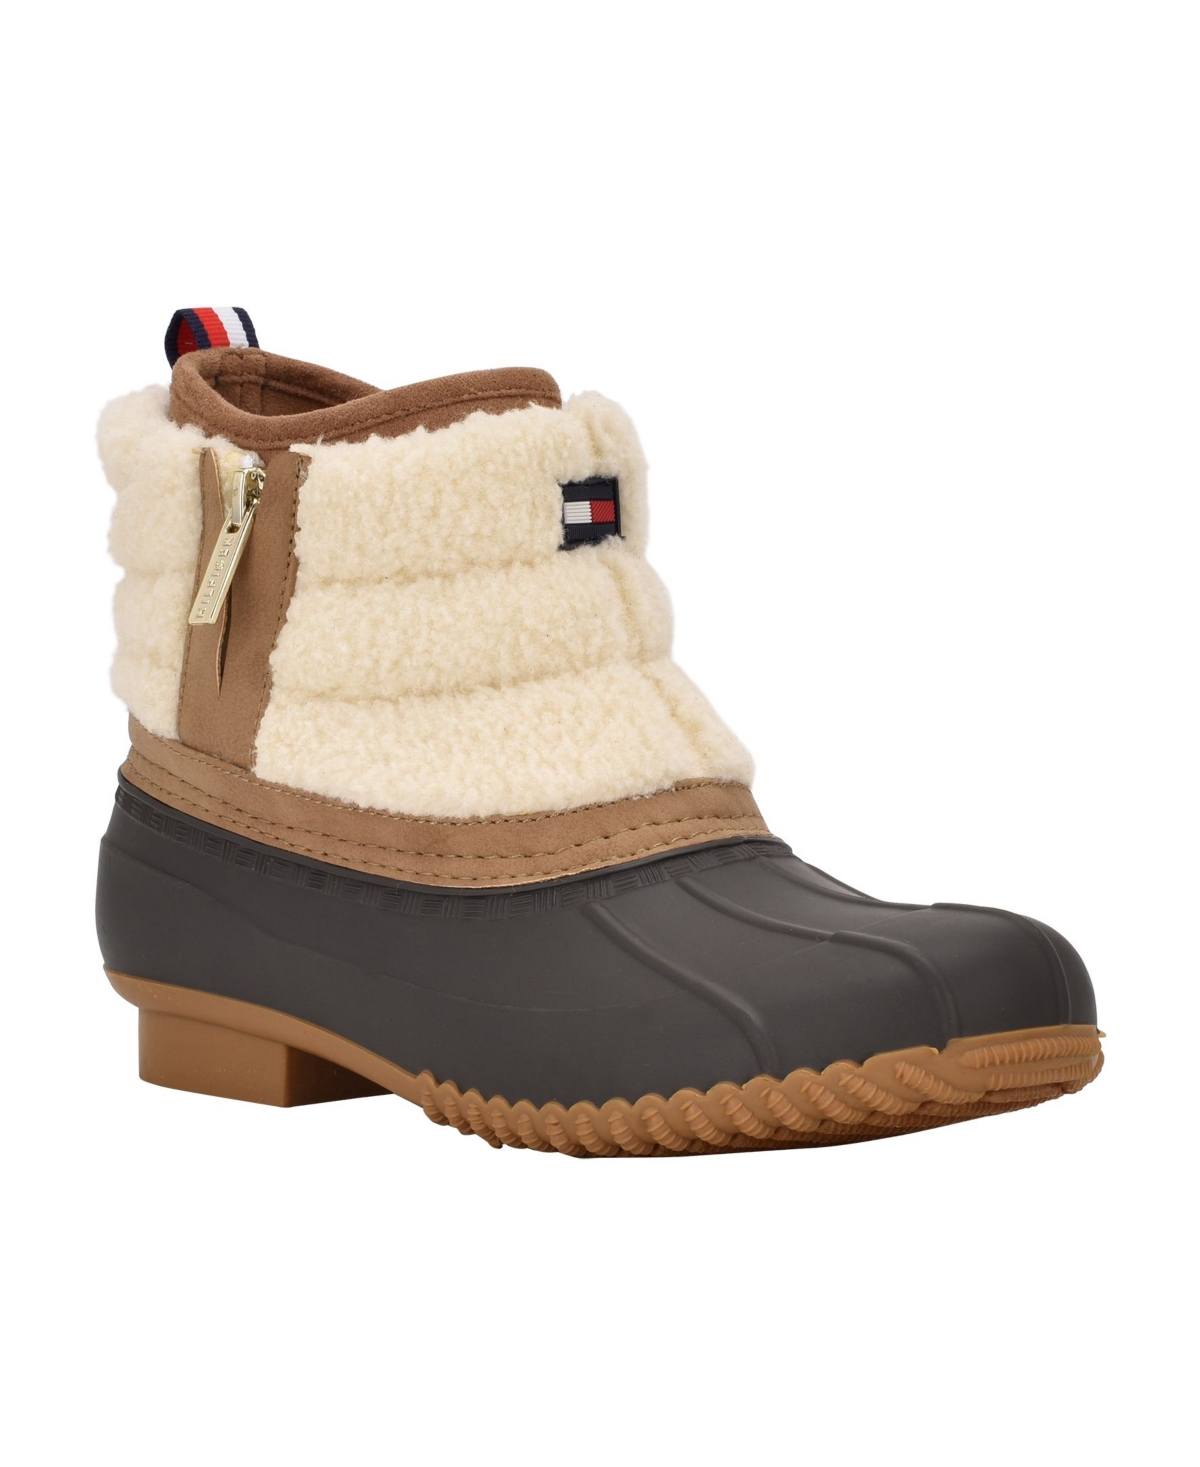 UPC 195972709768 product image for Tommy Hilfiger Women's Roana Zip Up Duck Booties Women's Shoes | upcitemdb.com